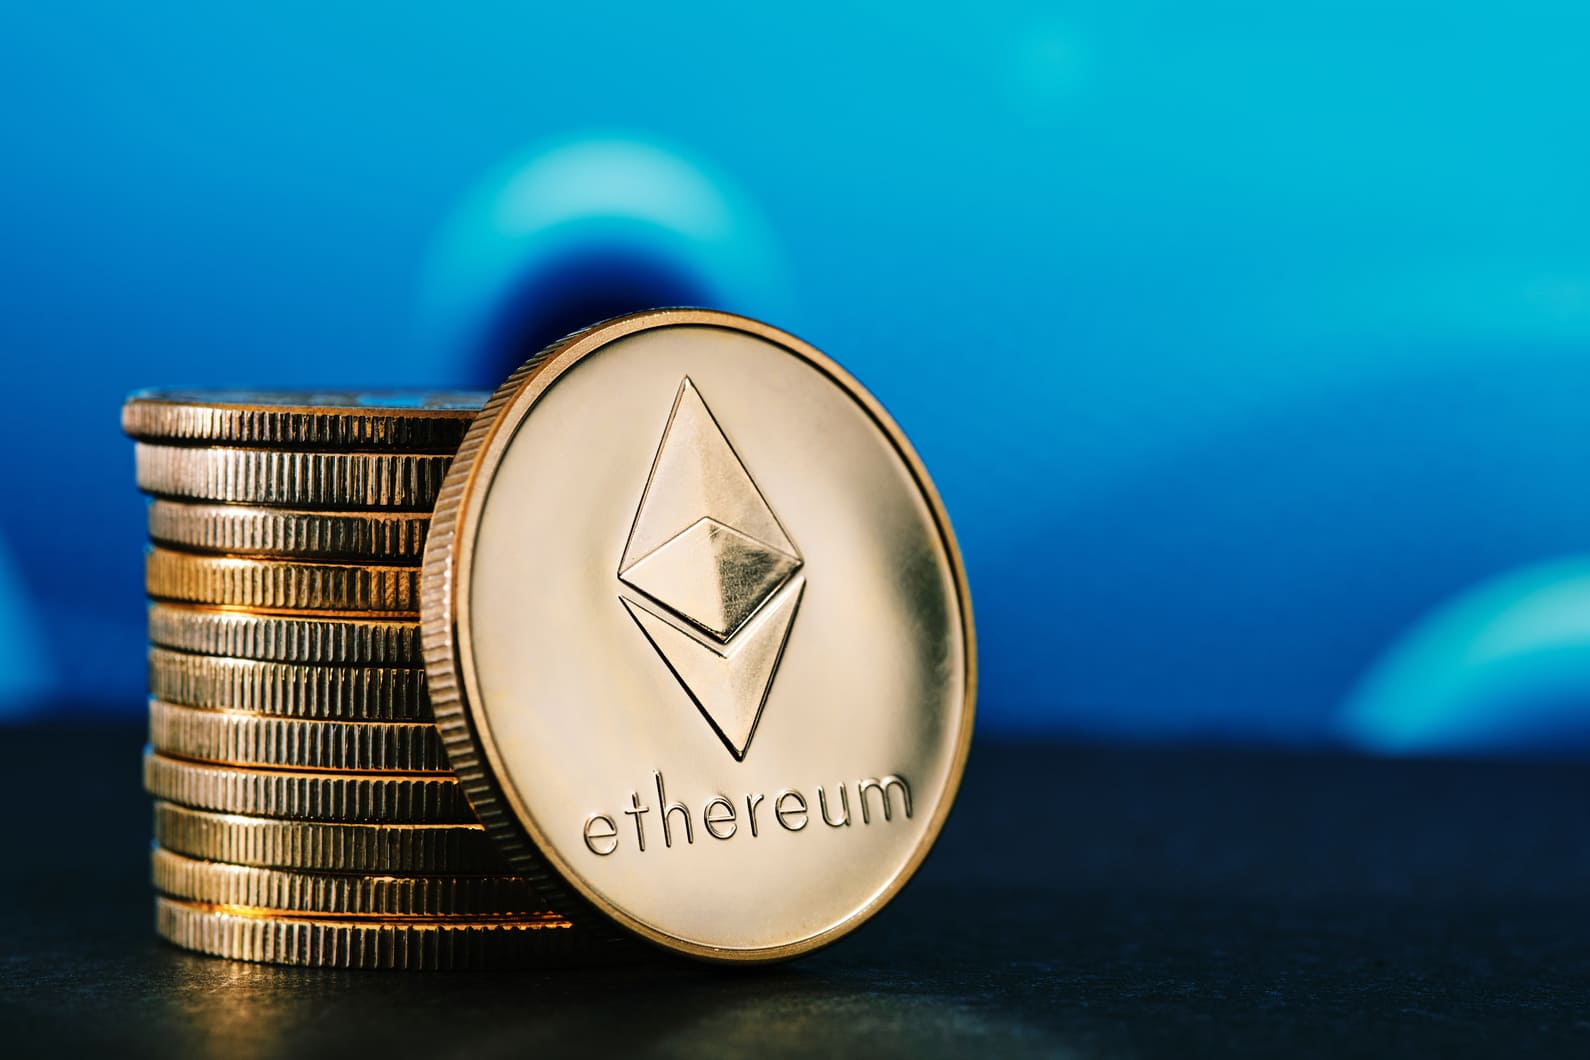 Ethereum Recorded Big Losses on Post-Merge Week, Kaiko Research shows